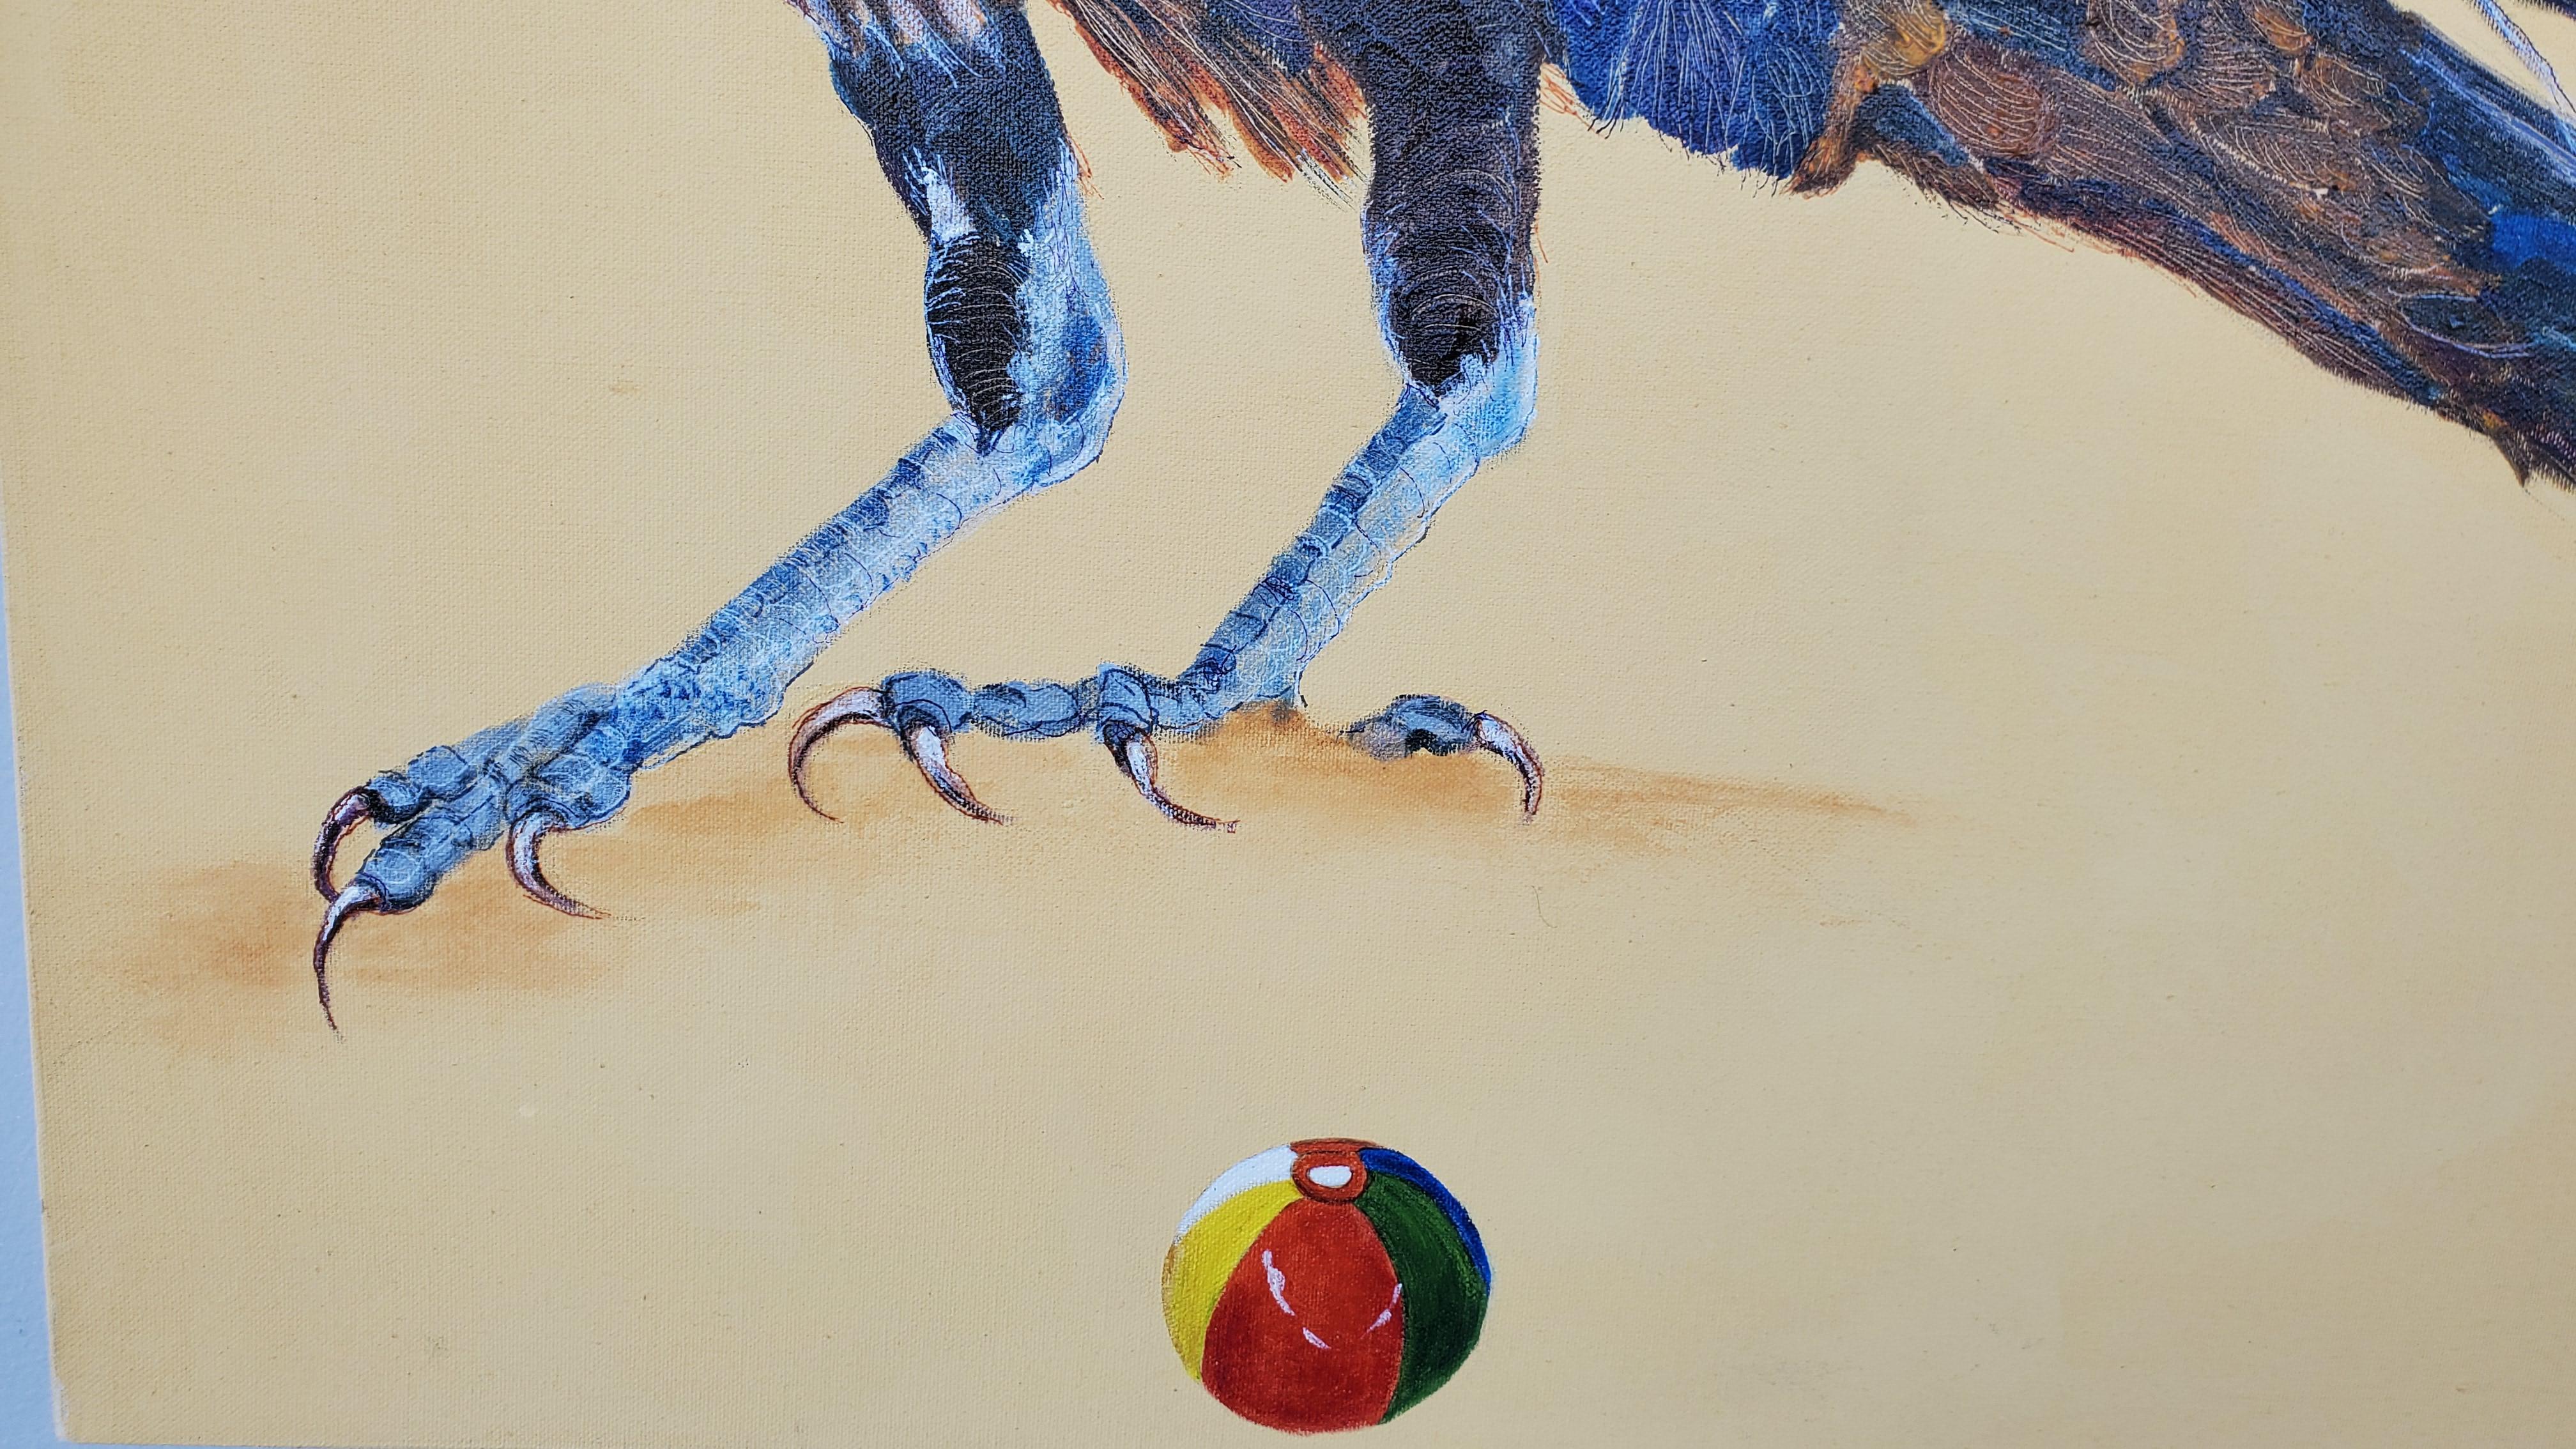 Avian Fables: Raven and Beach Ball 2 - acrylic and ink on canvas - Contemporary Painting by Alison Keenan